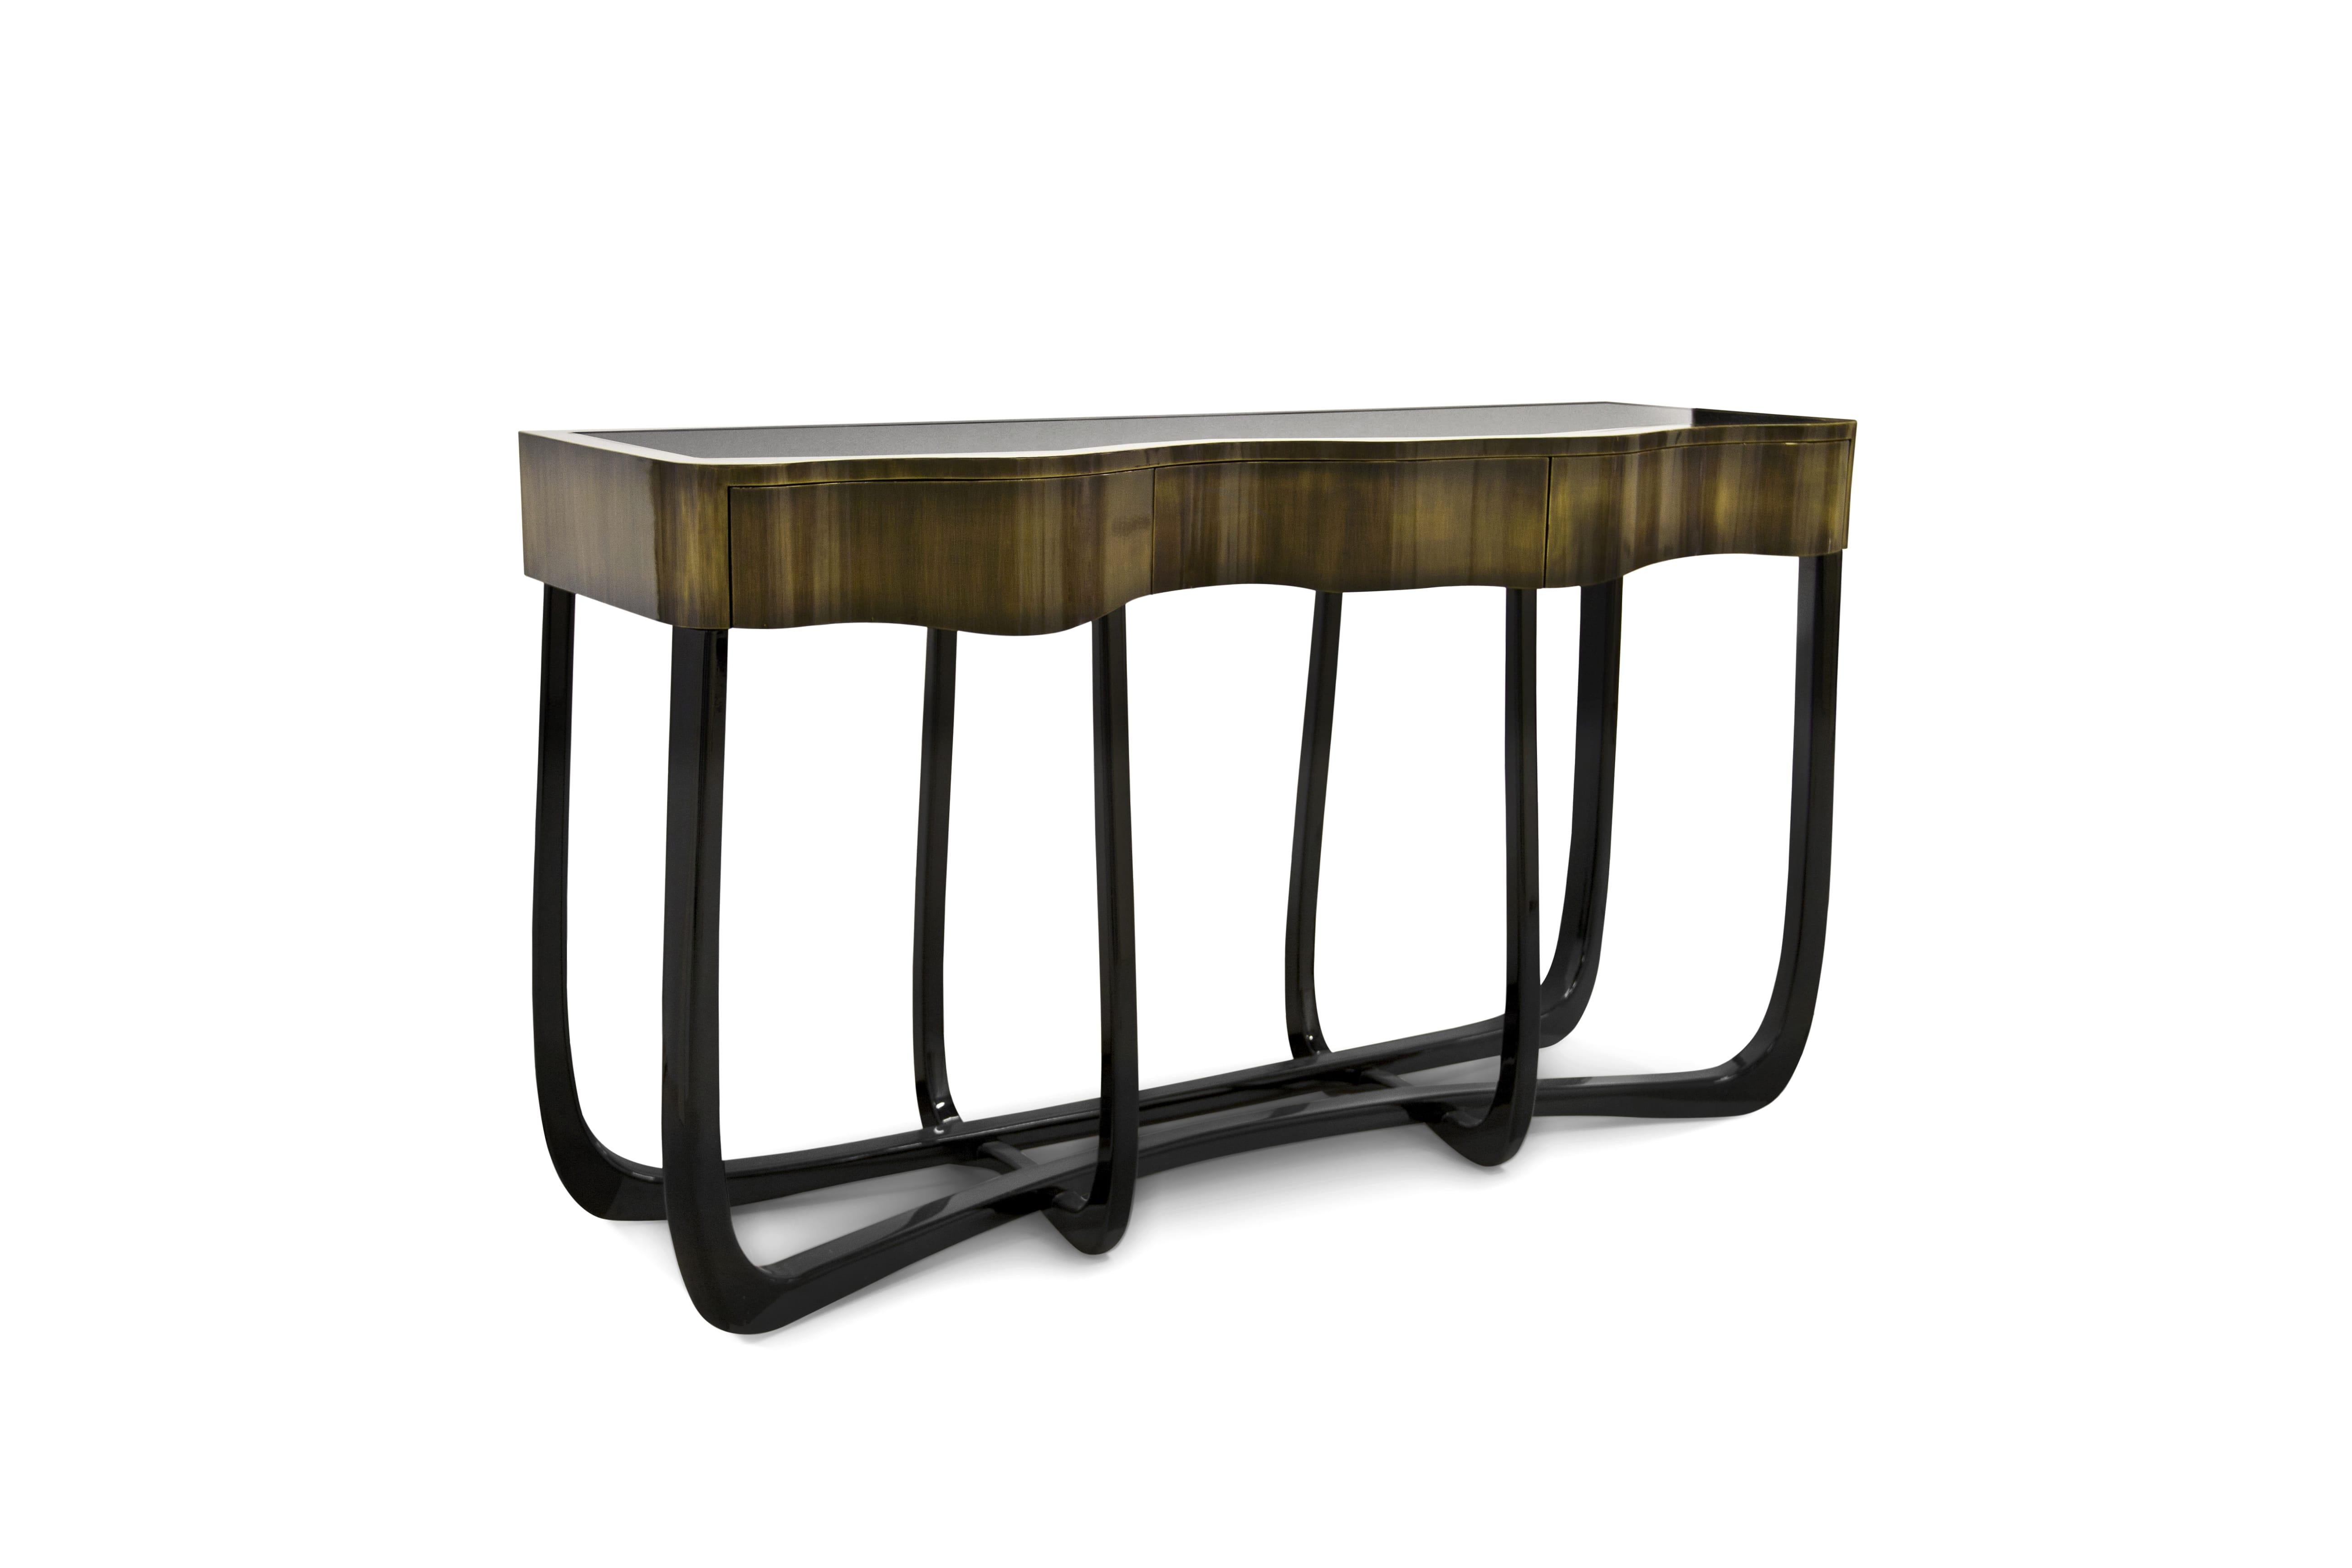 Boca do Lobo is an exclusive design furniture company that transcends the fusion of traditional and contemporary design. With the Sinuous Patina Console, you will successfully create a luxurious environment. Sinuous lines draw the elegant character